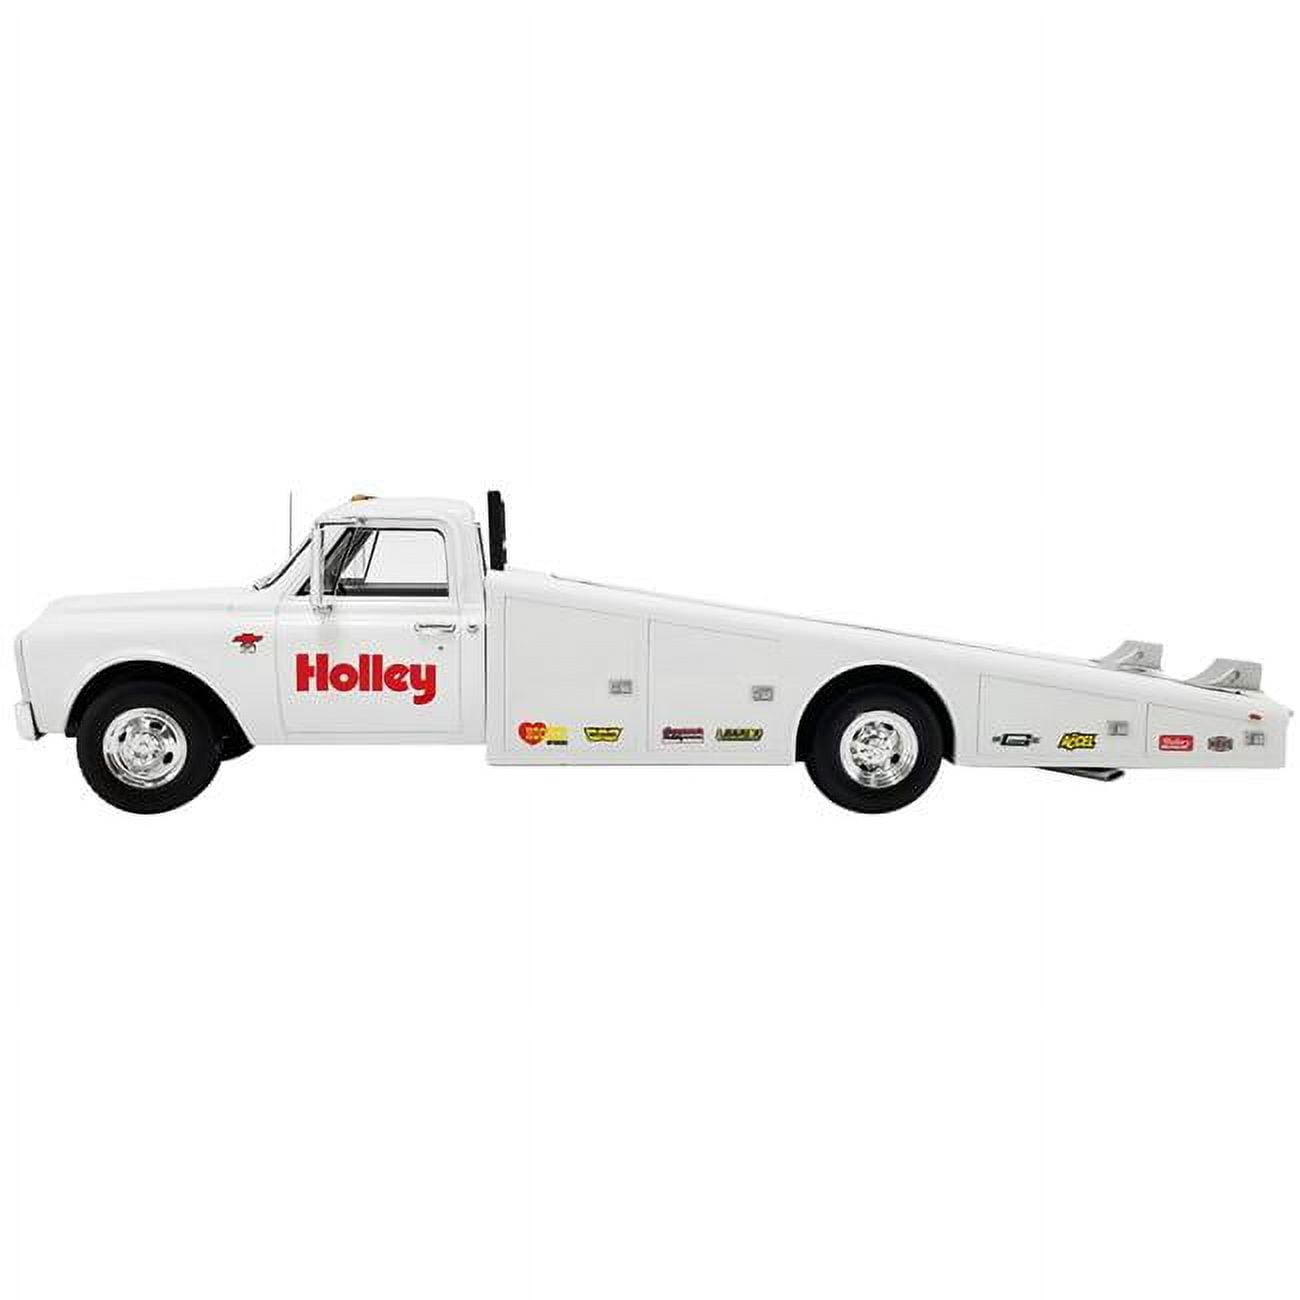 Picture of Acme A1801707WH 1967 Chevrolet C-30 Ramp Truck Holley Speed Shop Limited Edition 1-18 Diecast Model Car, White